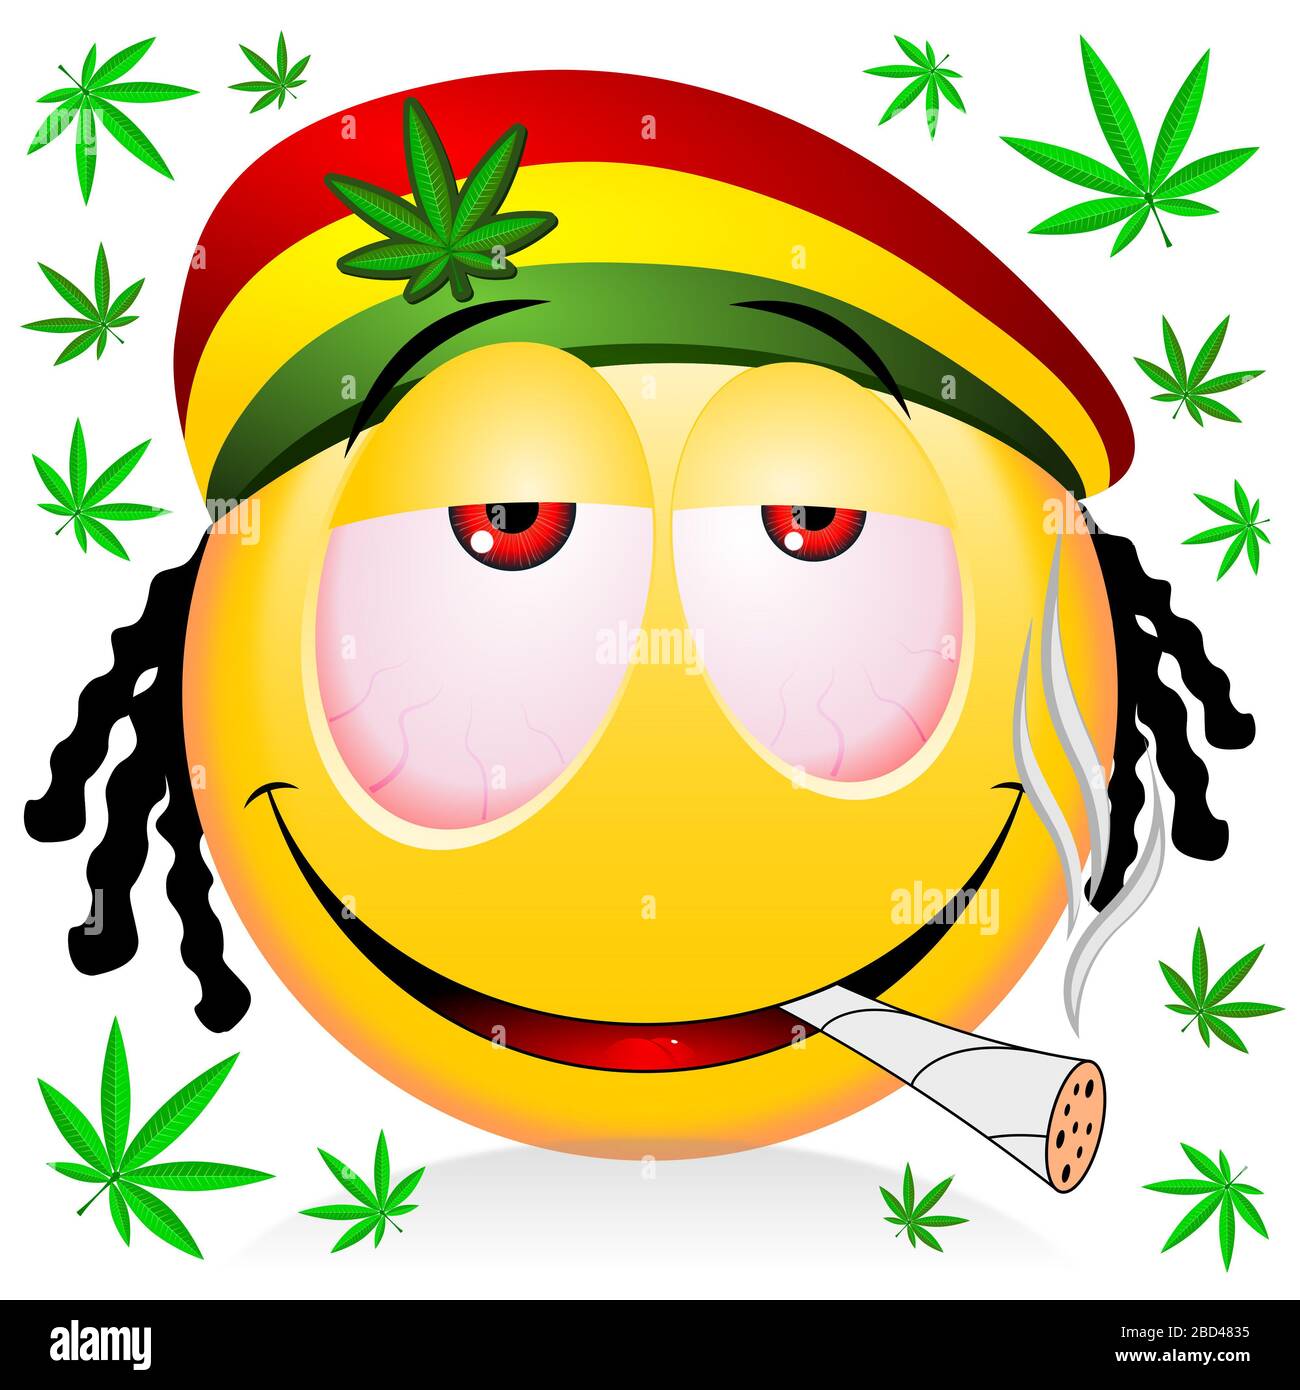 weed pictures cartoon